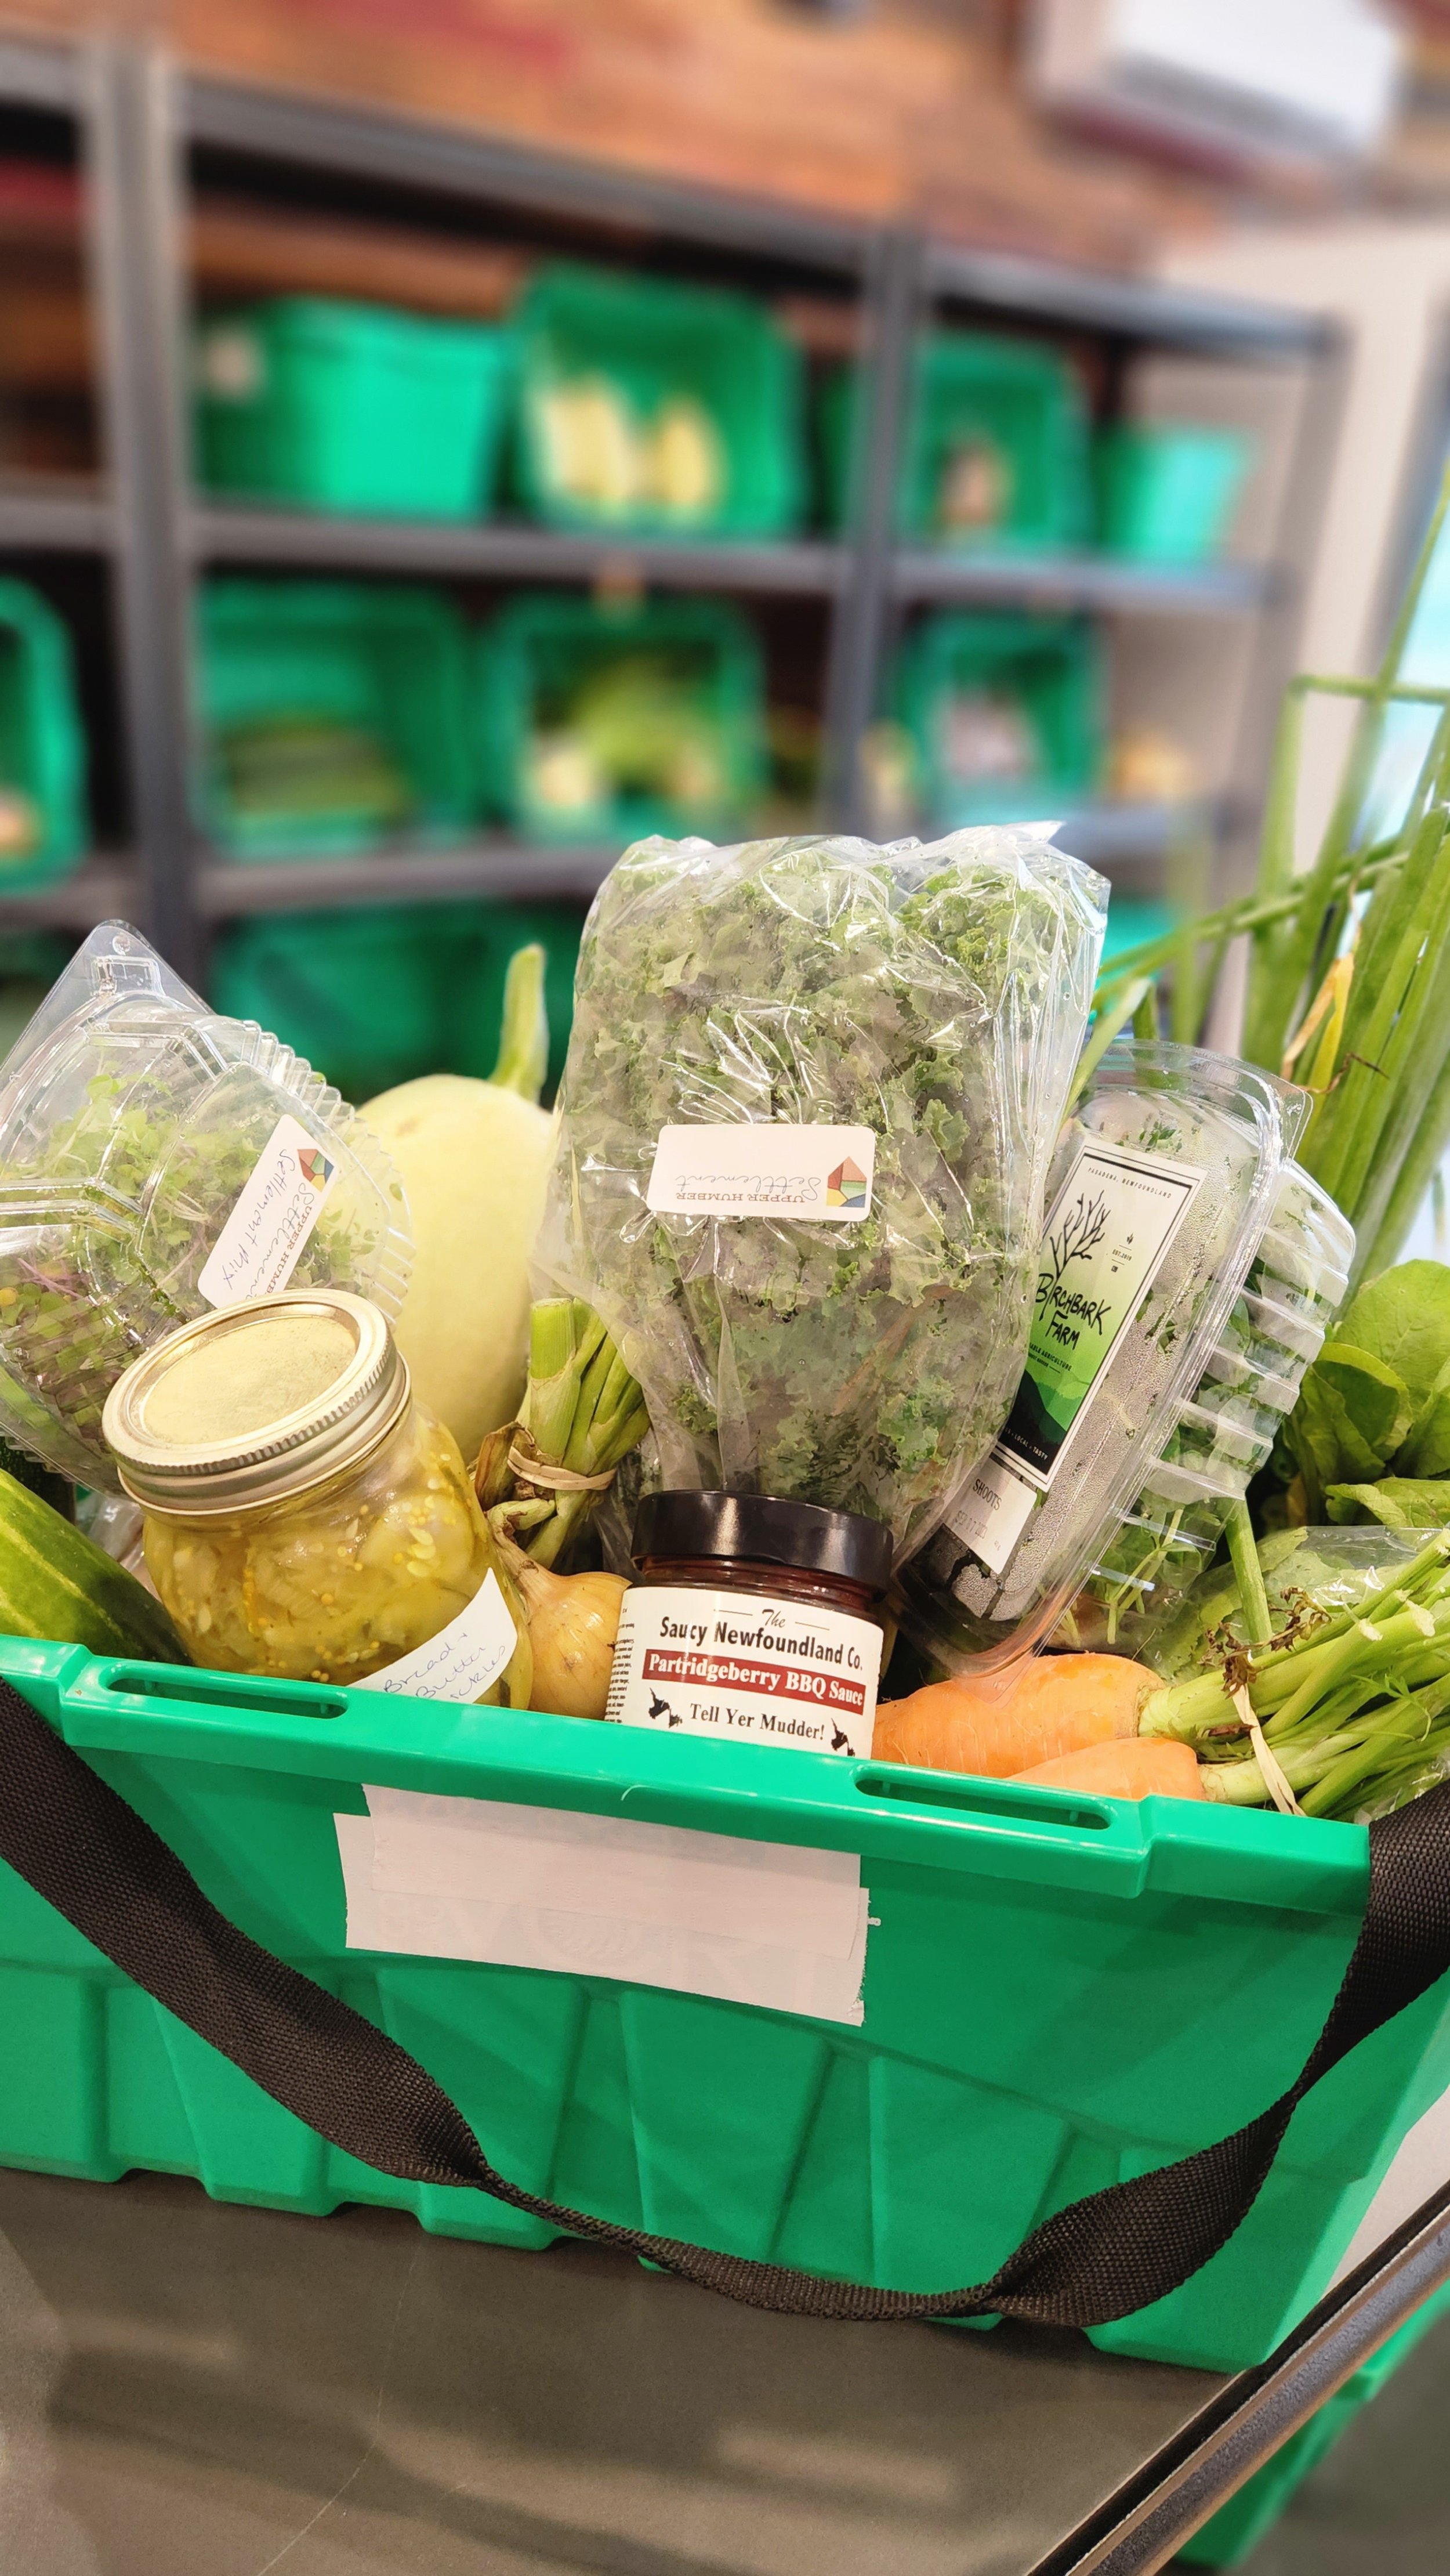  A green plastic bin in front of shelves holding more of the same, containing greens, carrots, onions, squash, and a jar each of pickle and jam. 